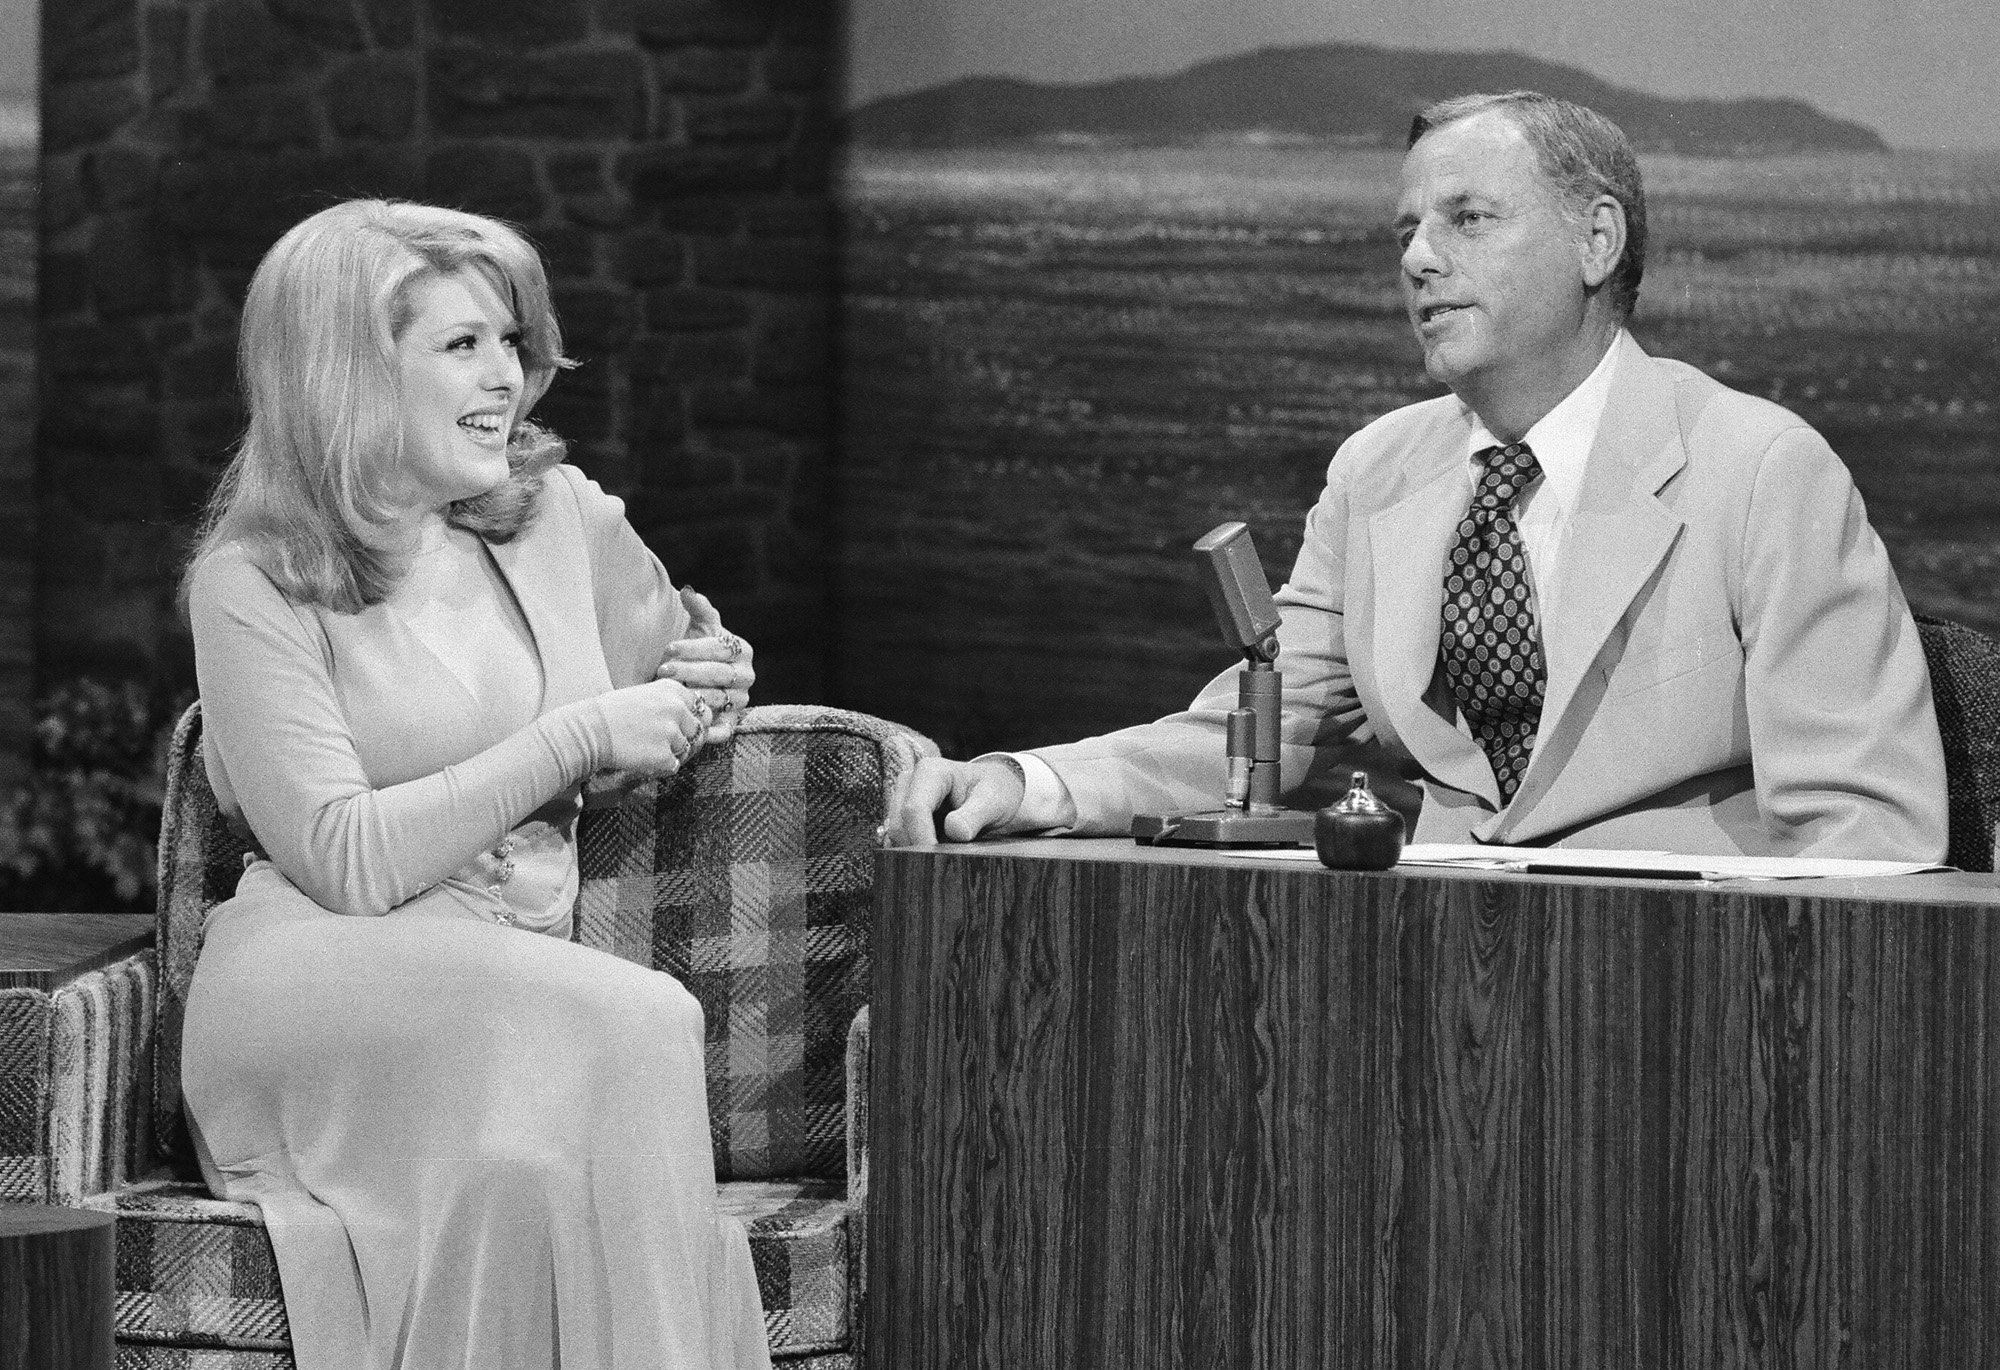 'The Tonight Show' guest host McLean Stevenson, right, chats with actor Bernadette Peters in 1976.